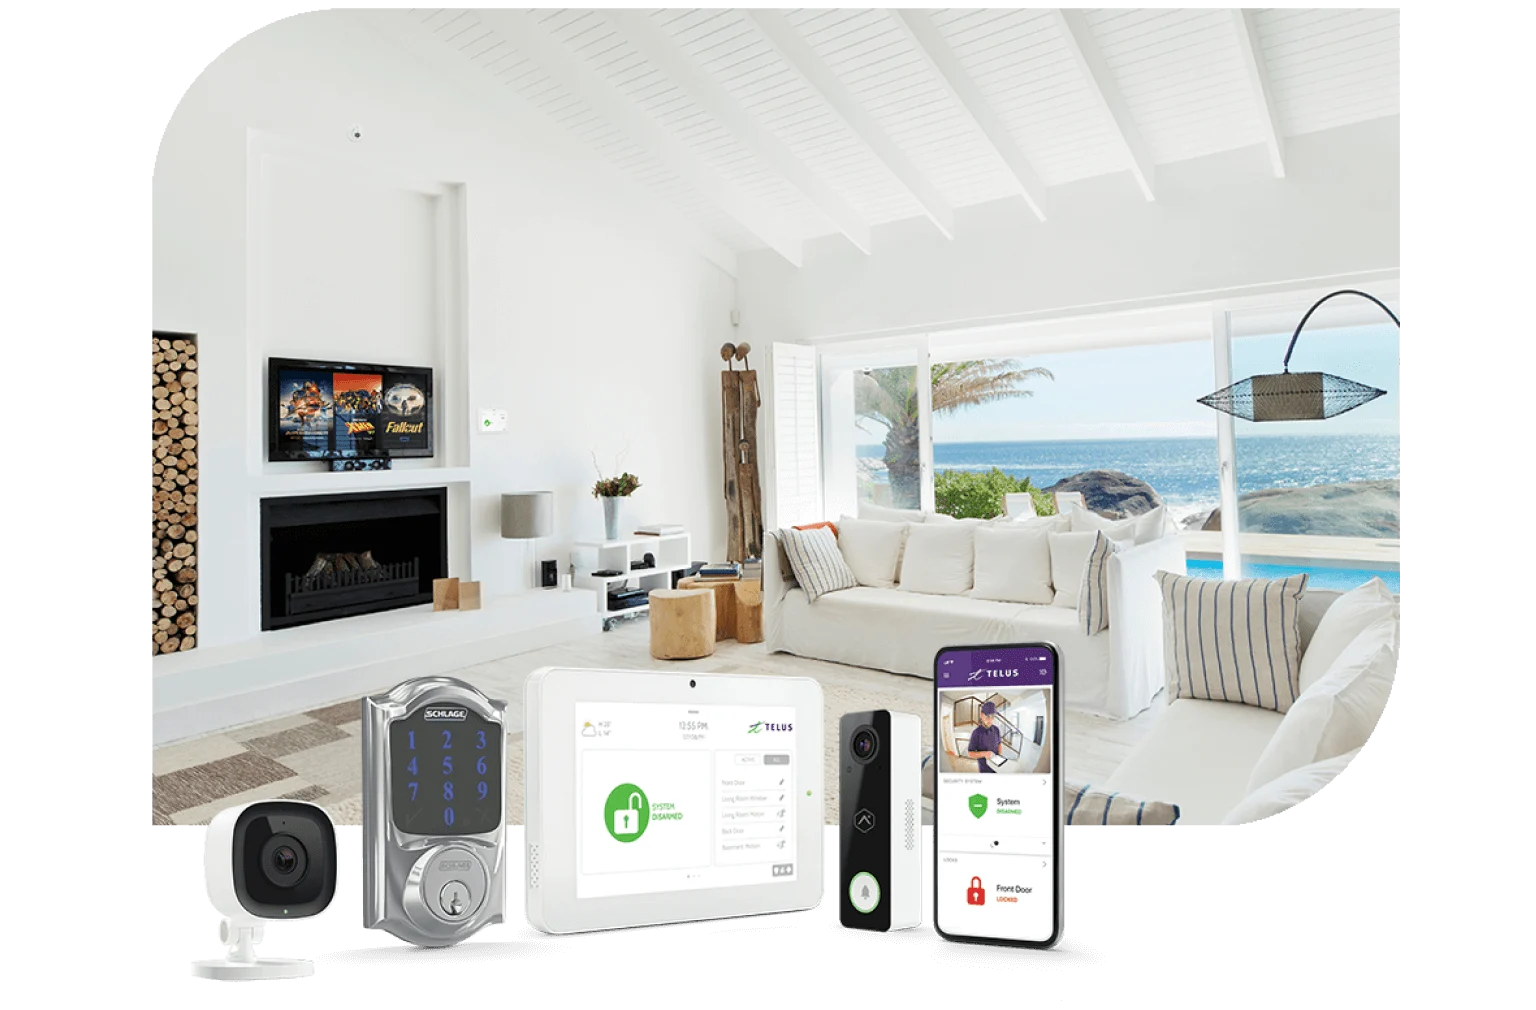 An image showing the interior of a cottage alongside images of TELUS SmartHome Security devices.